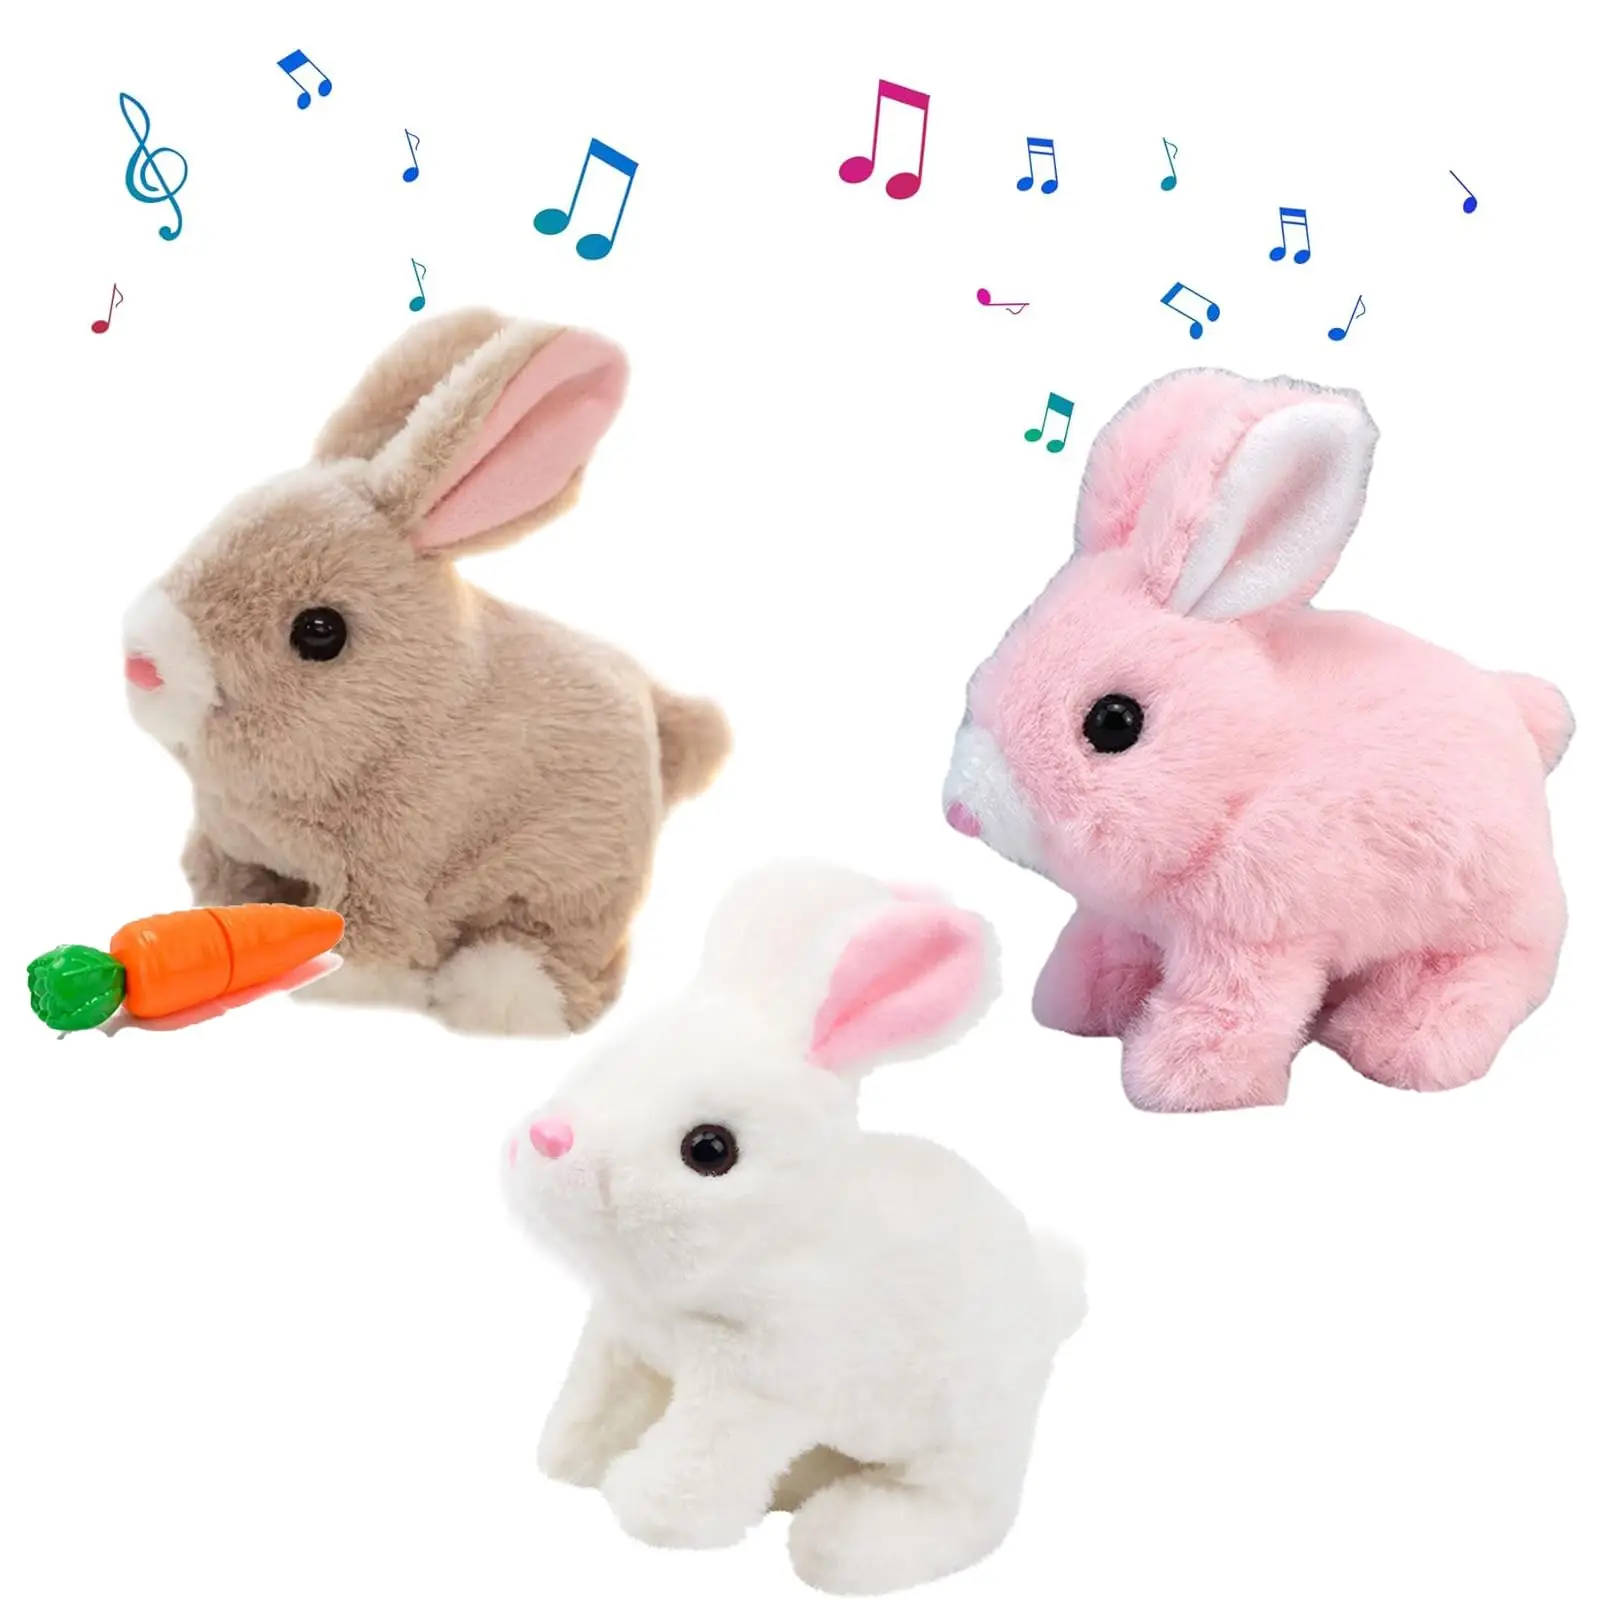 Bunny Toys Educational Interactive Toys Easter Filling Bunny Toy Walking Rabbit Educational Toys for Kids Birthday Gift inflatable panda polar bear mascot costume carnival party dress up outfits for adults ad walking promotion halloween xmas easter